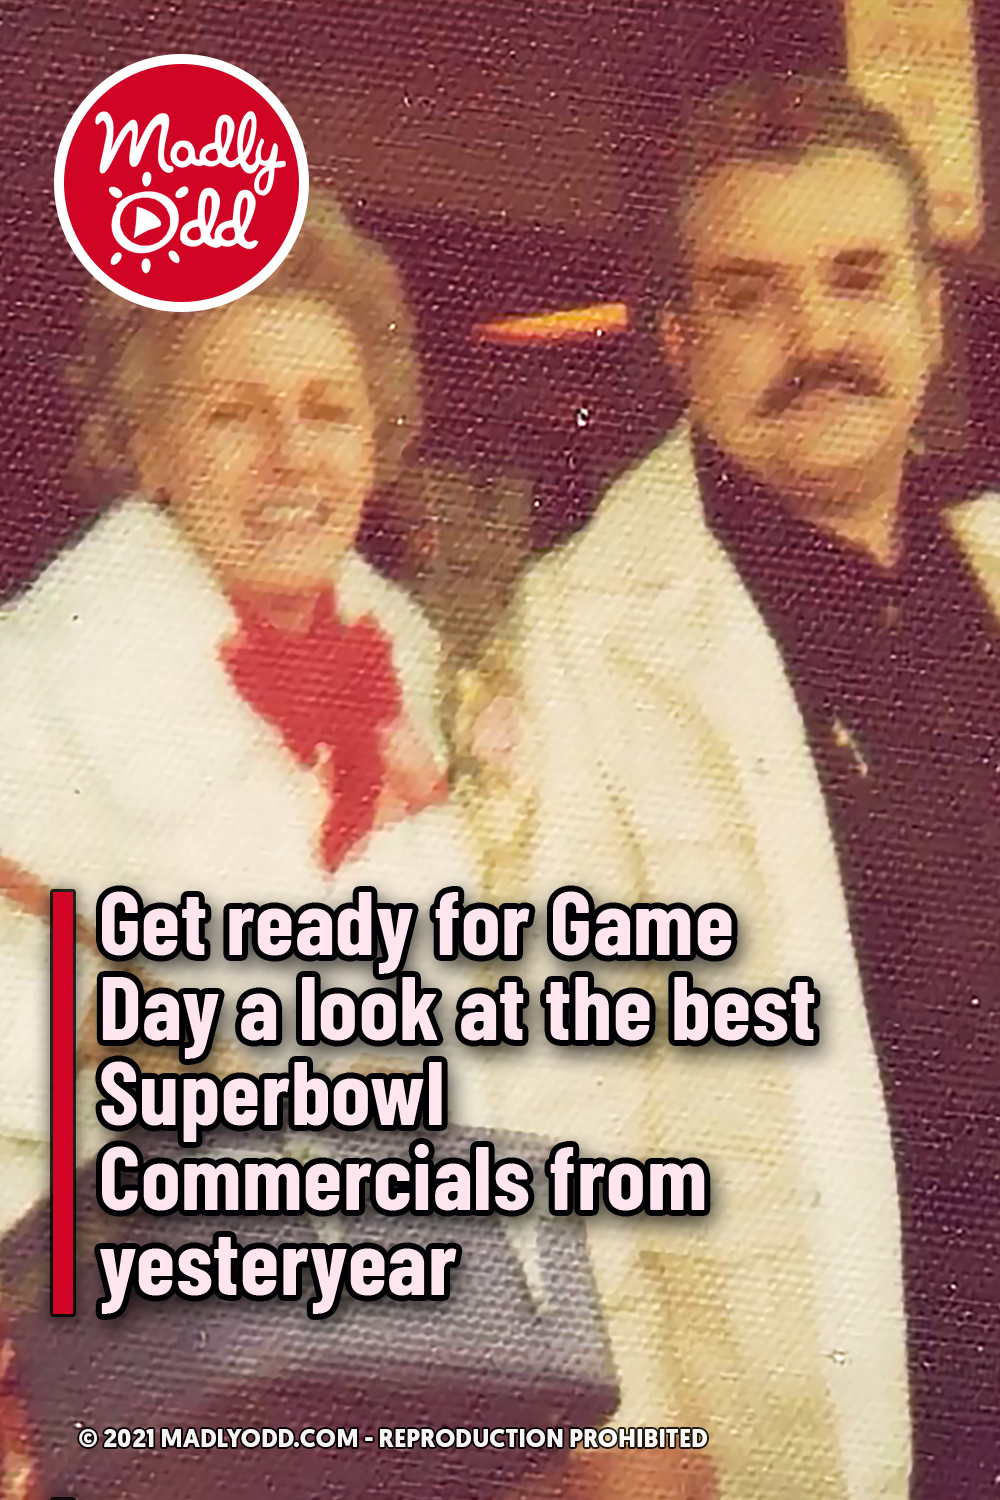 Get ready for Game Day a look at the best Superbowl Commercials from yesteryear